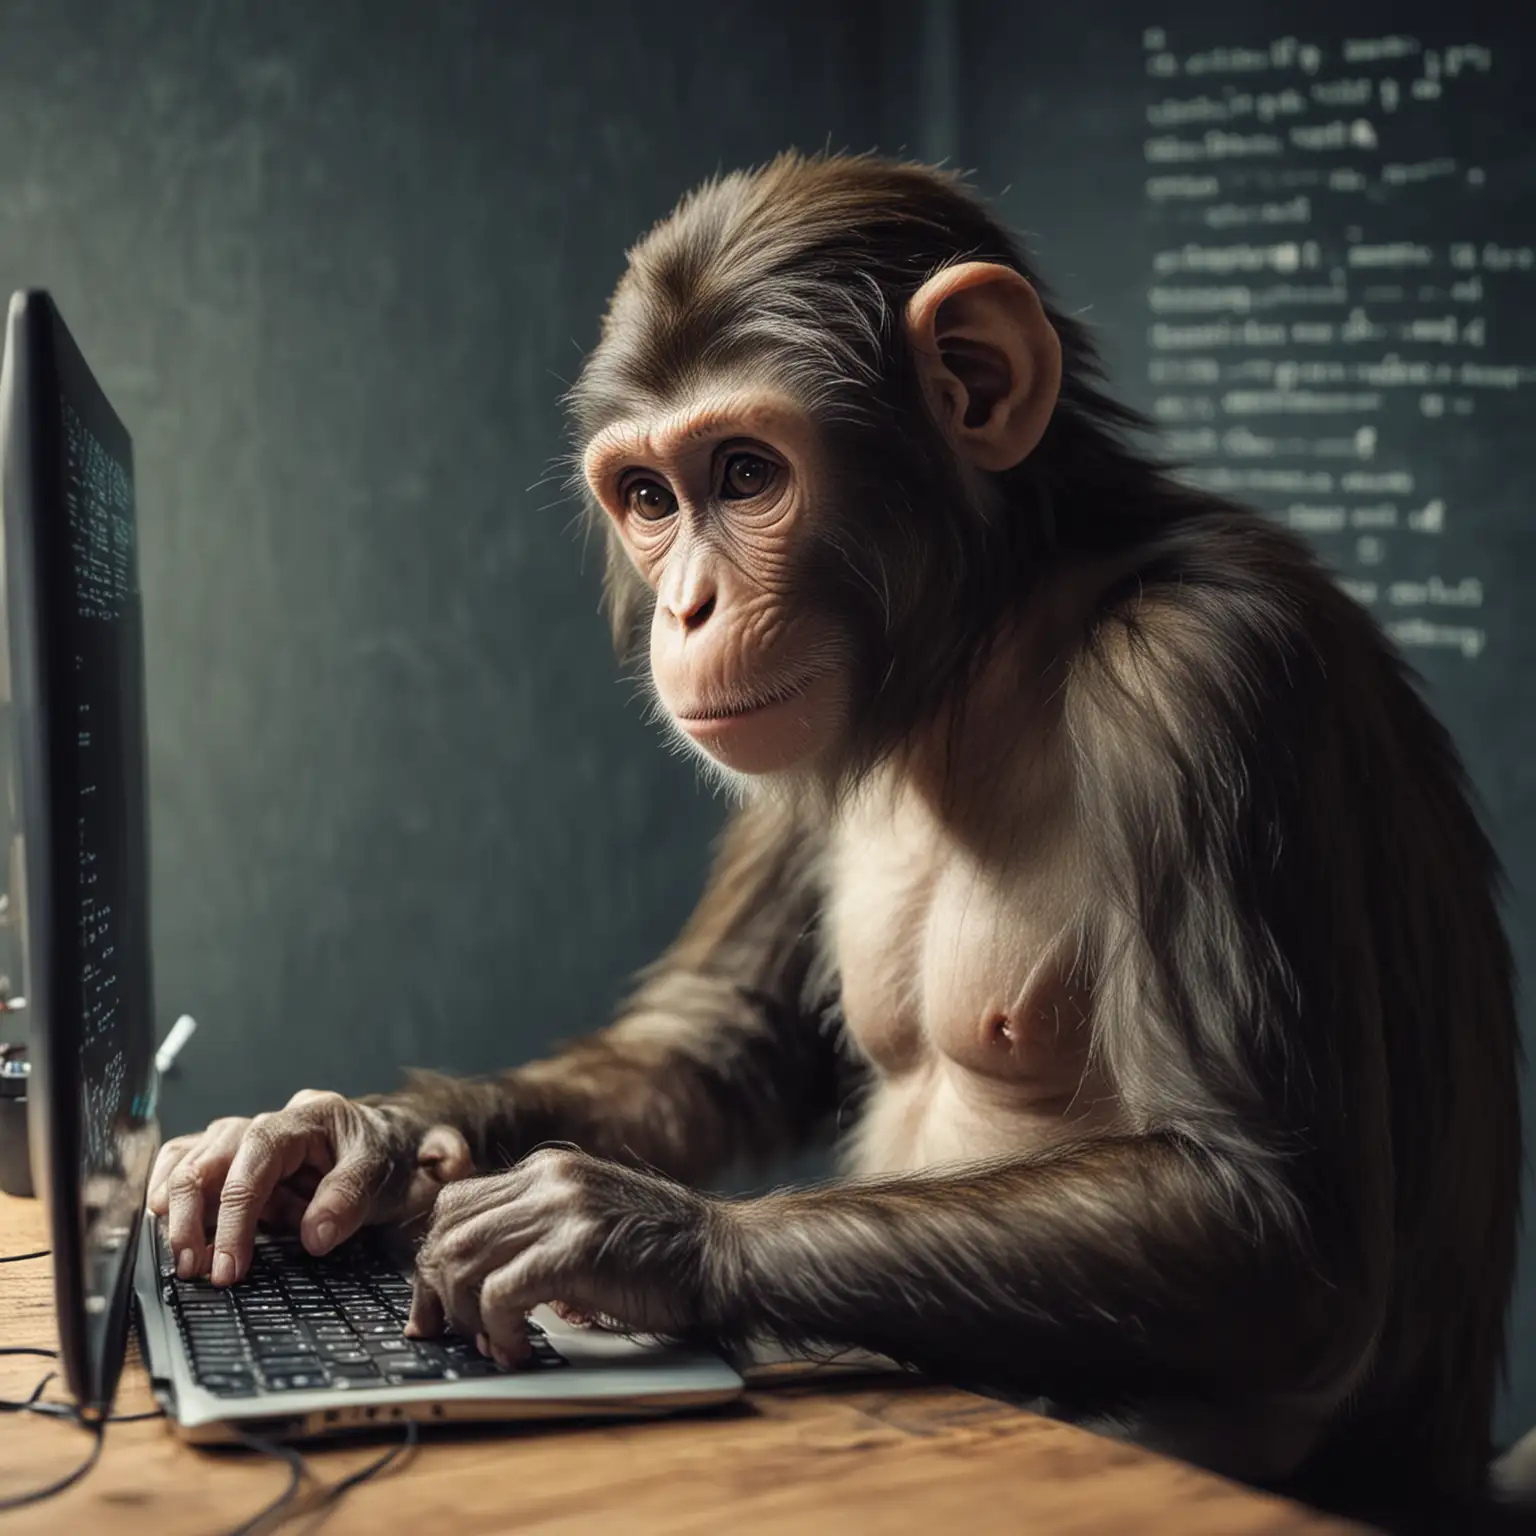 Programmer-Monkey-Writing-Code-Changing-World-Very-Handsome